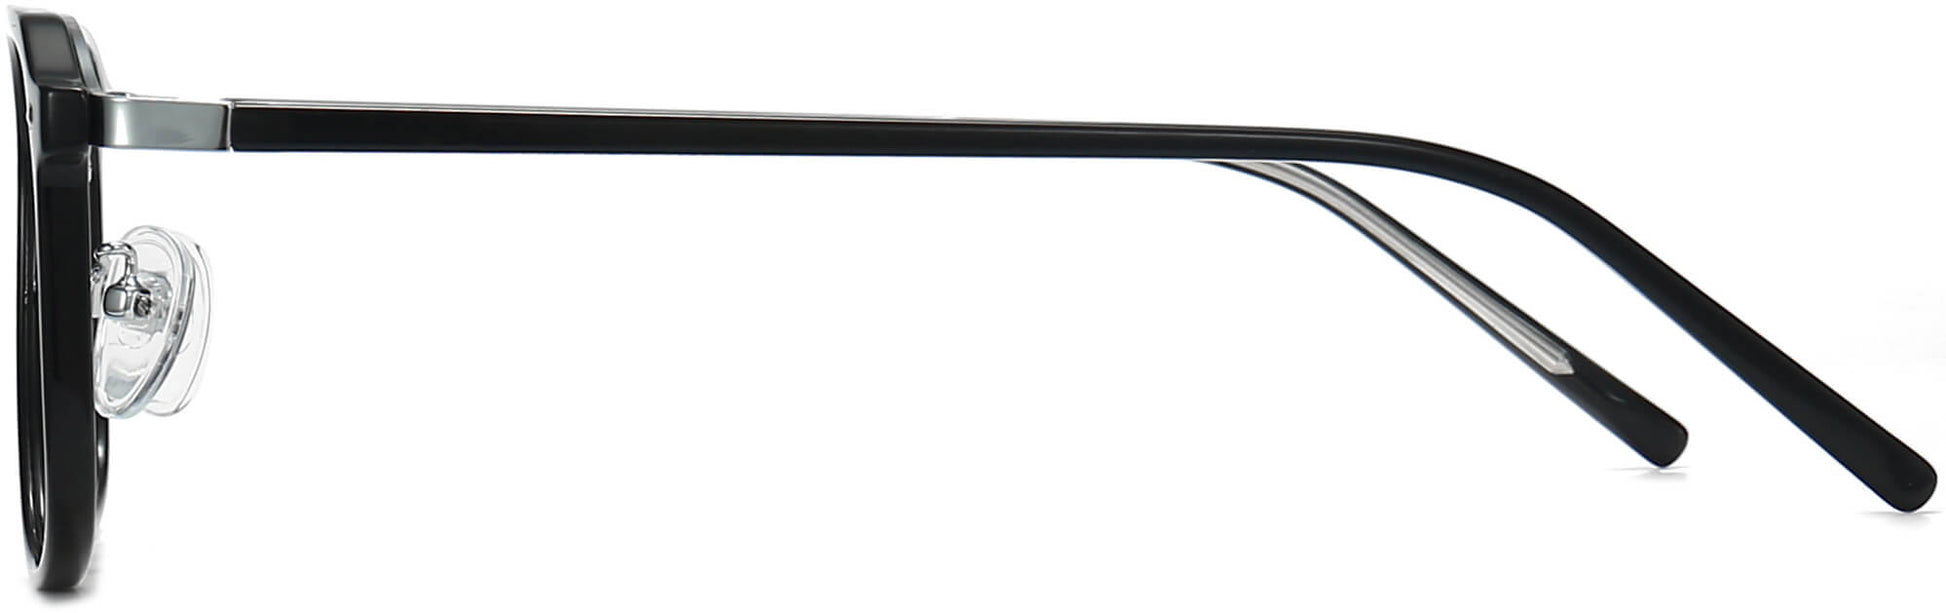 Wells Square Black Eyeglasses from ANRRI, side view